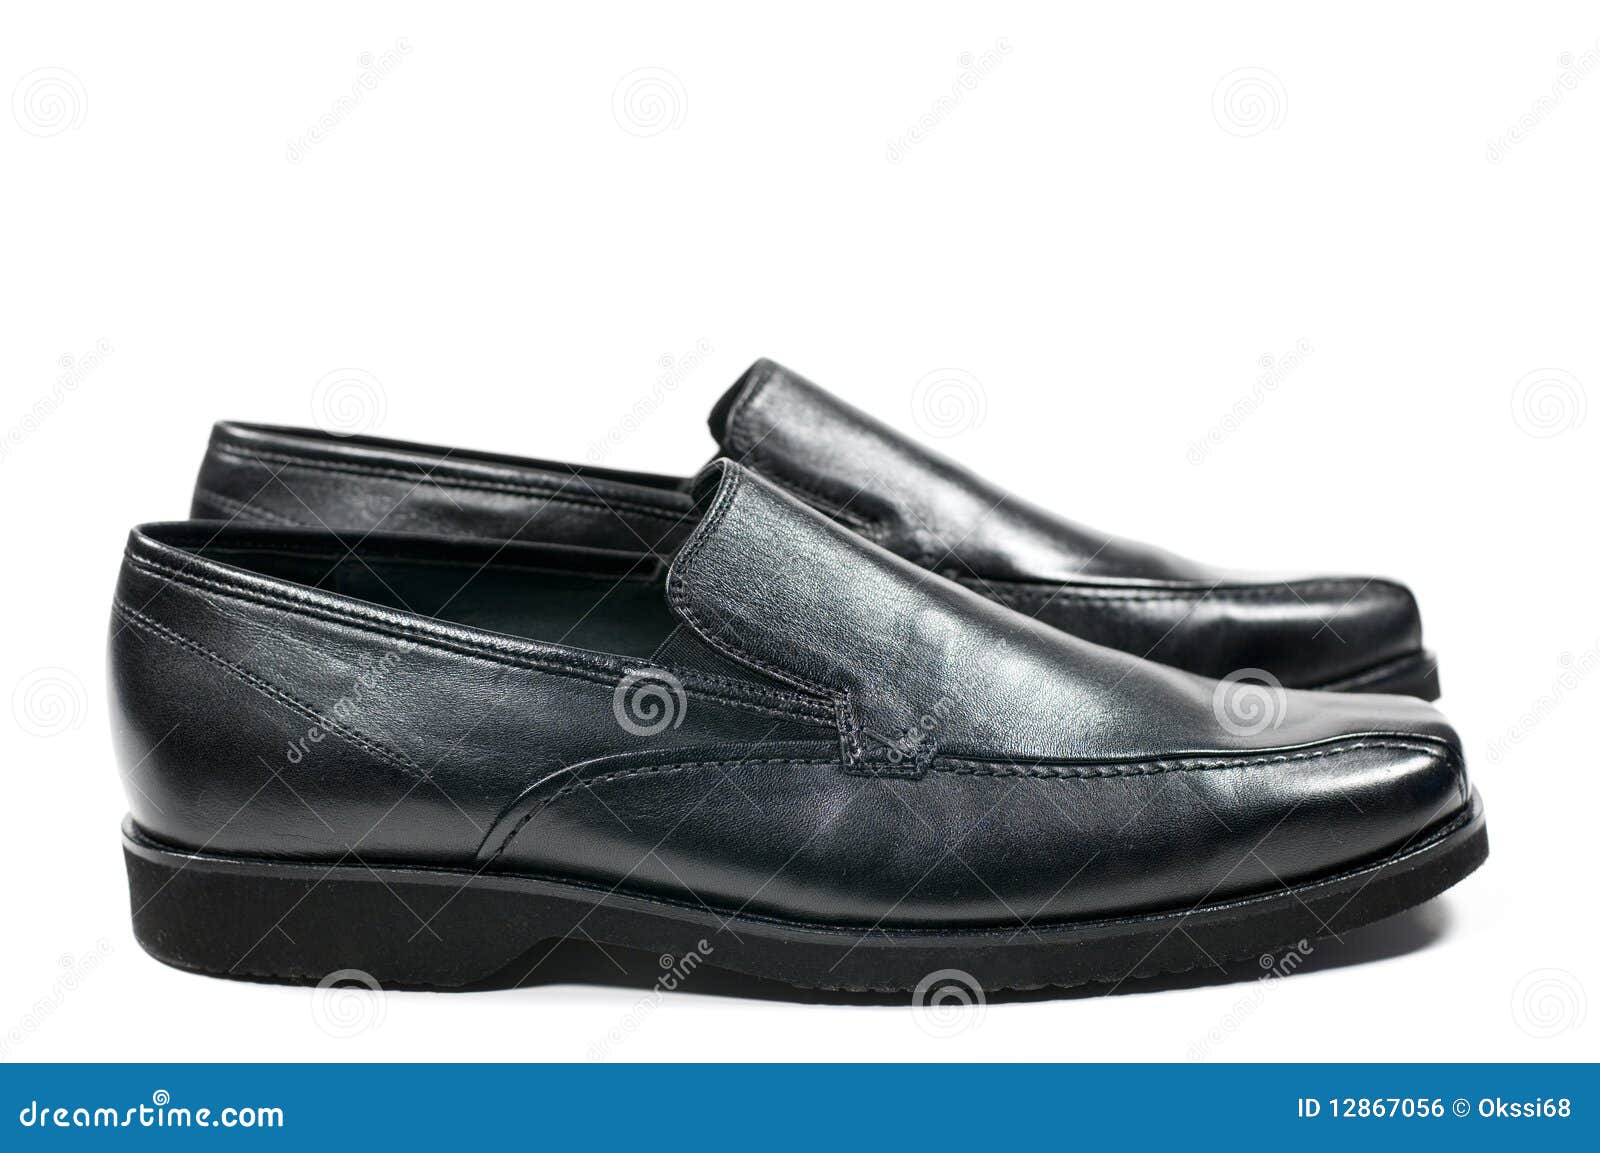 Black man s shoes stock photo. Image of classical, isolated - 12867056